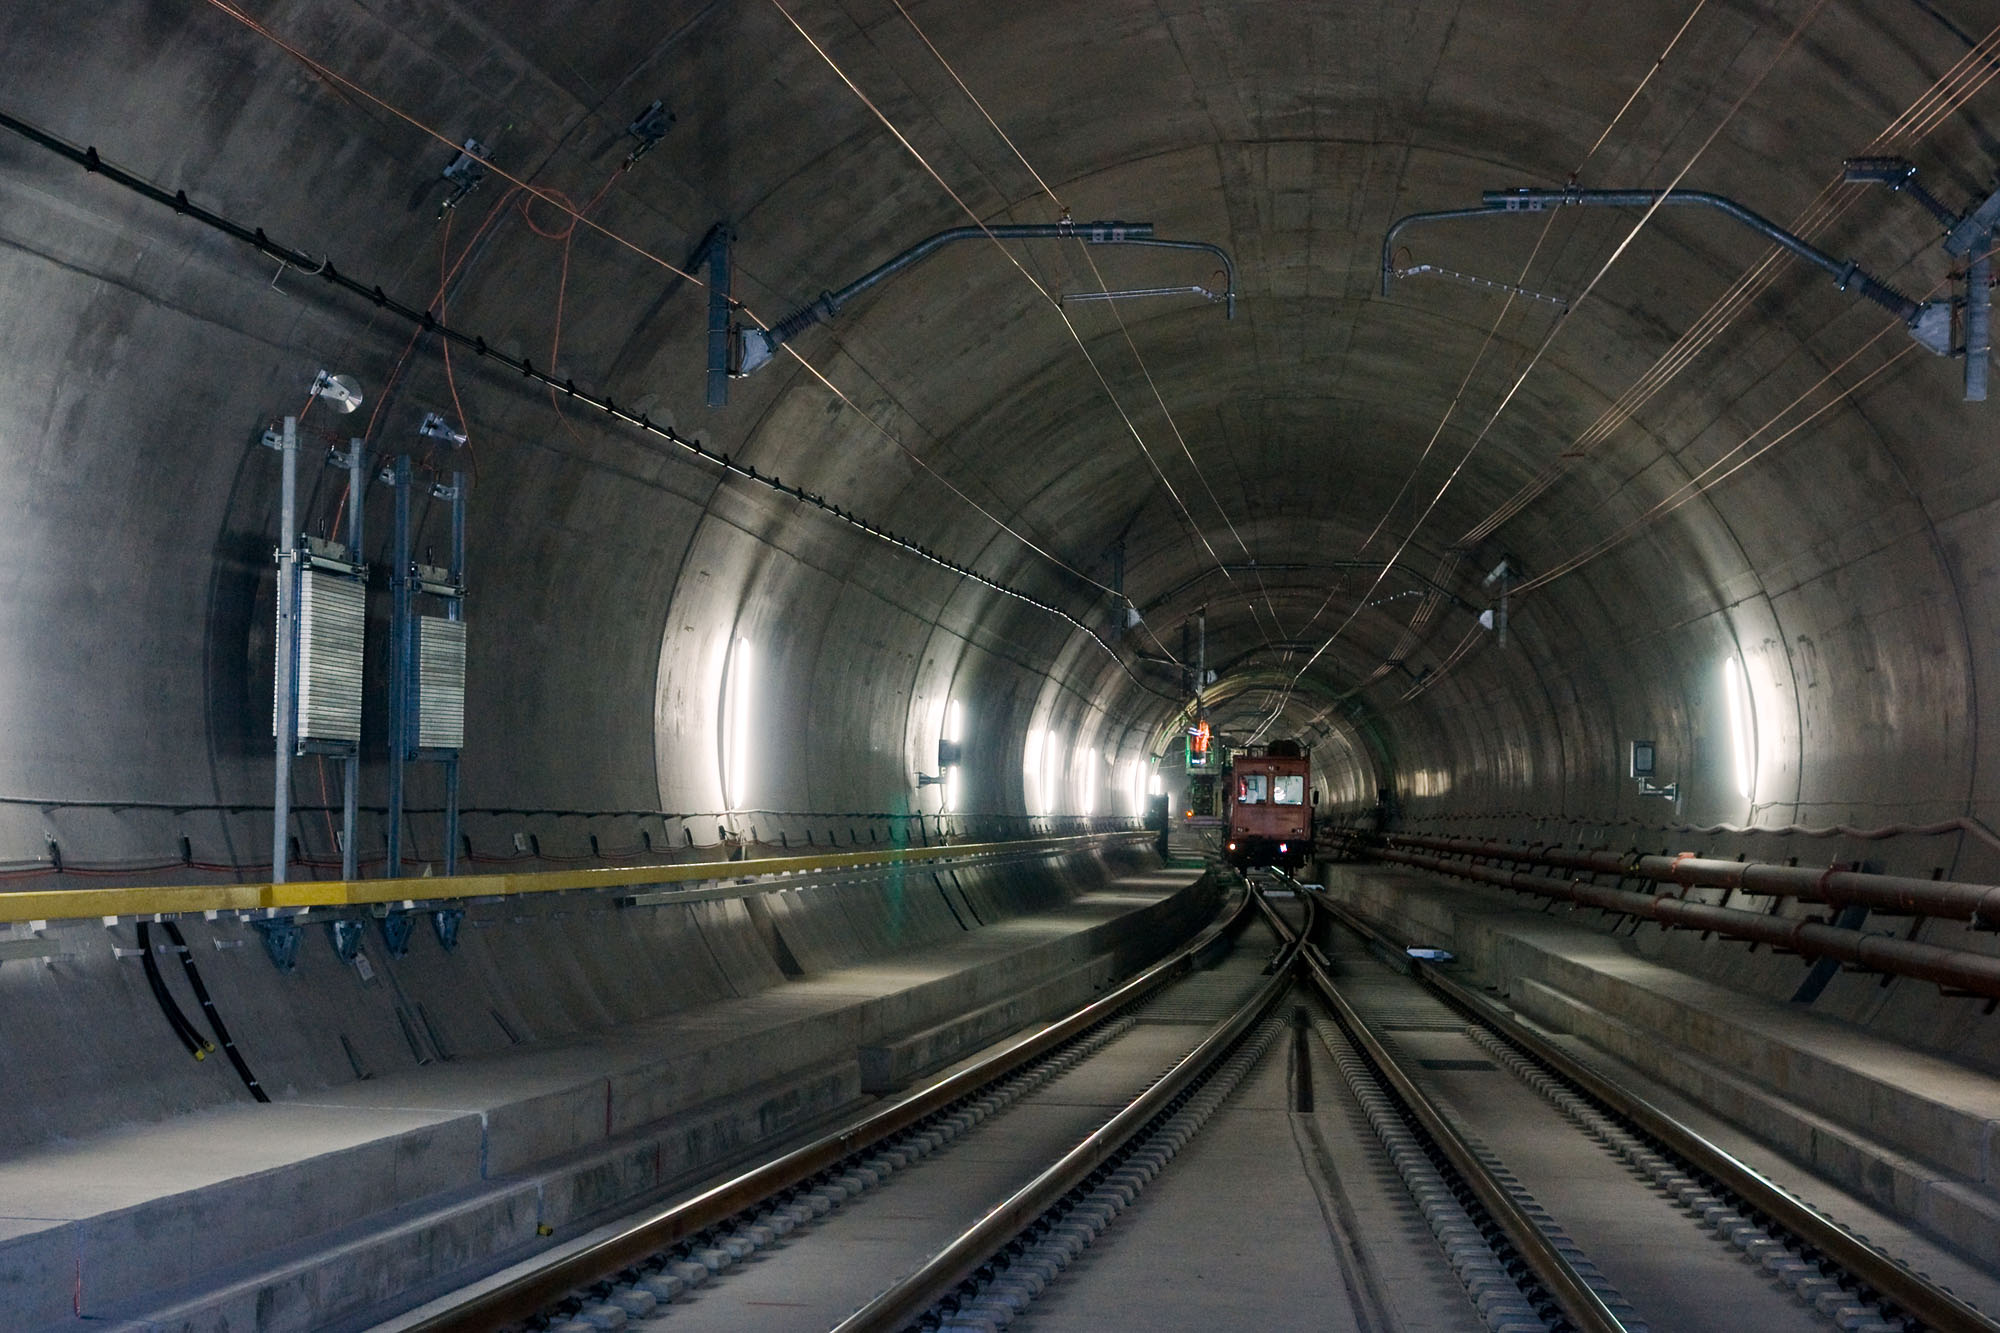 Most exciting news from Switzerland so far this year: world’s longest tunnel opens